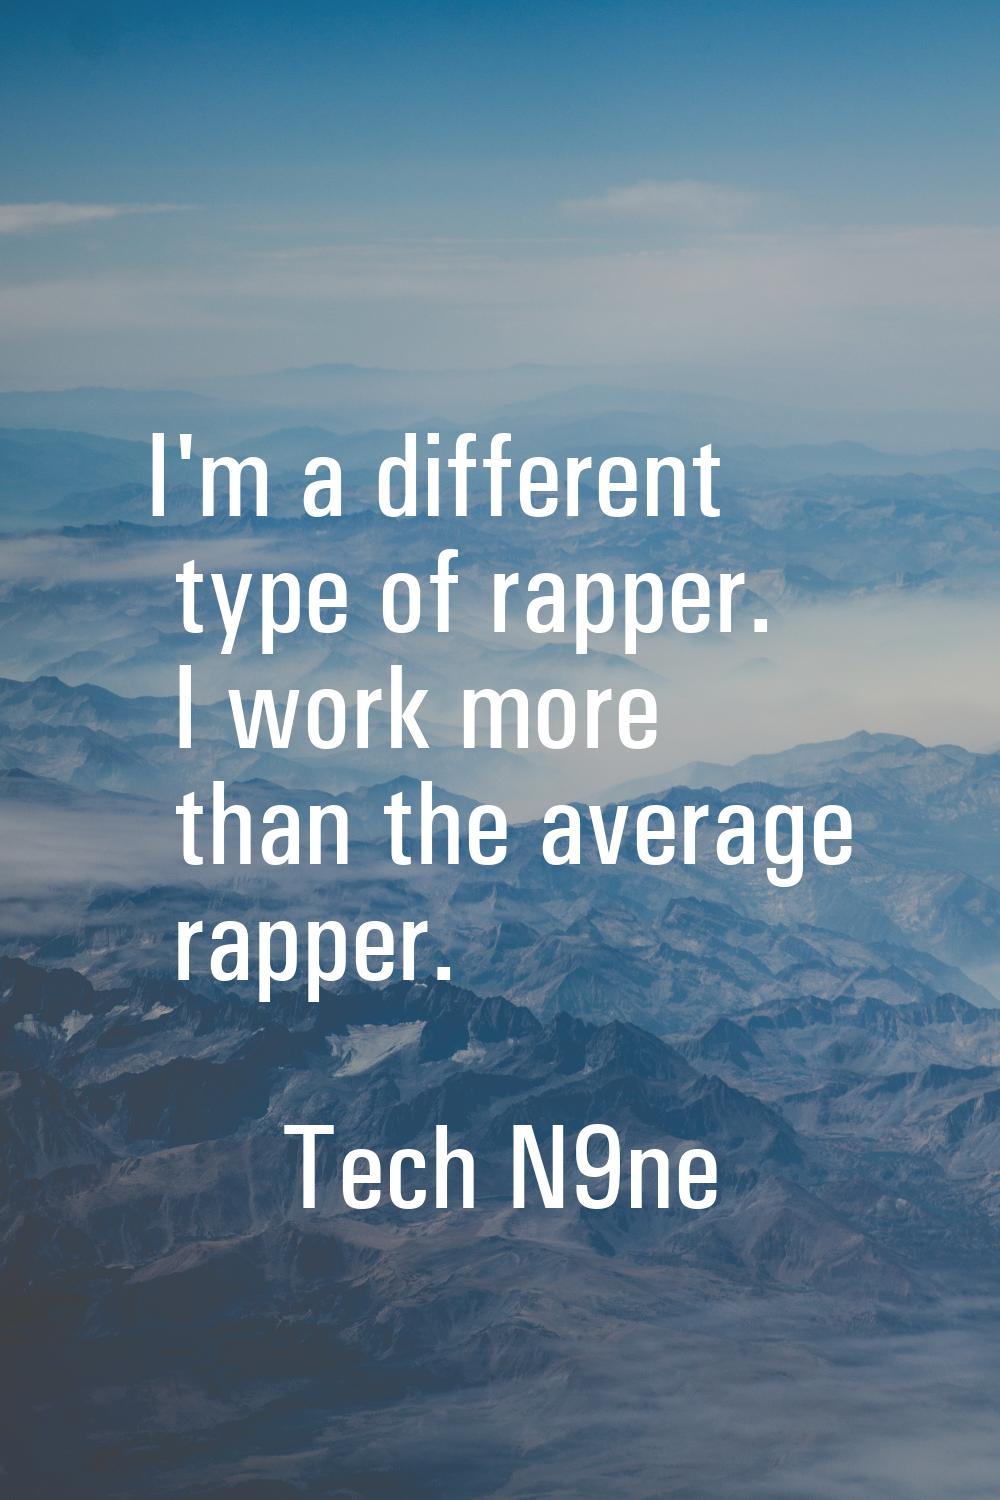 I'm a different type of rapper. I work more than the average rapper.